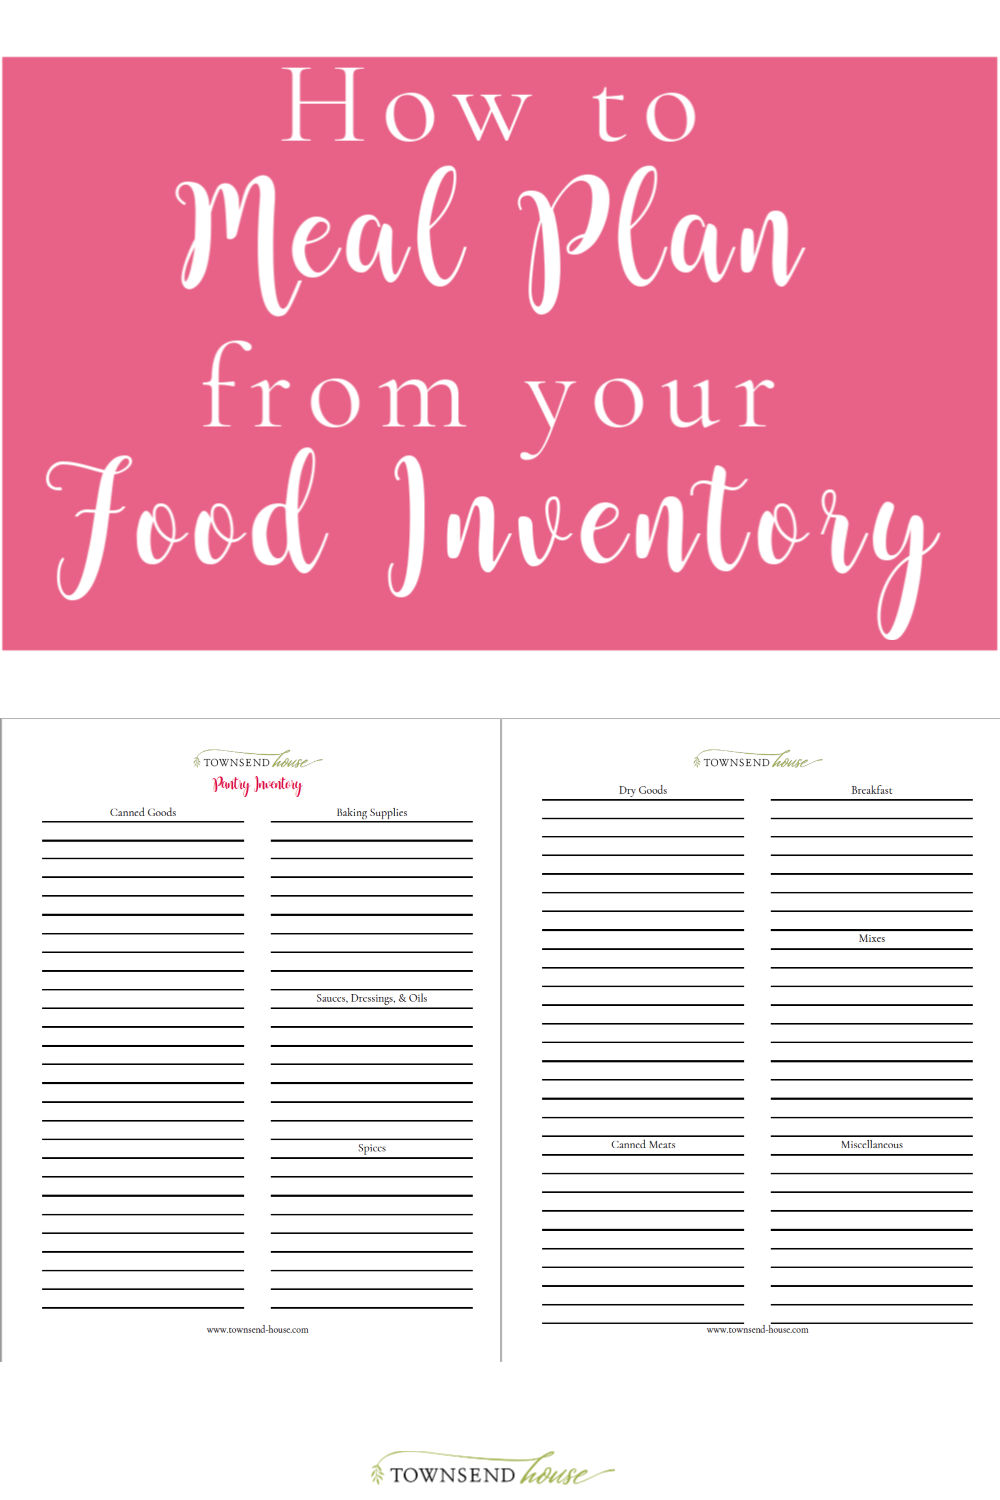 How to Meal Plan from your Food Inventory